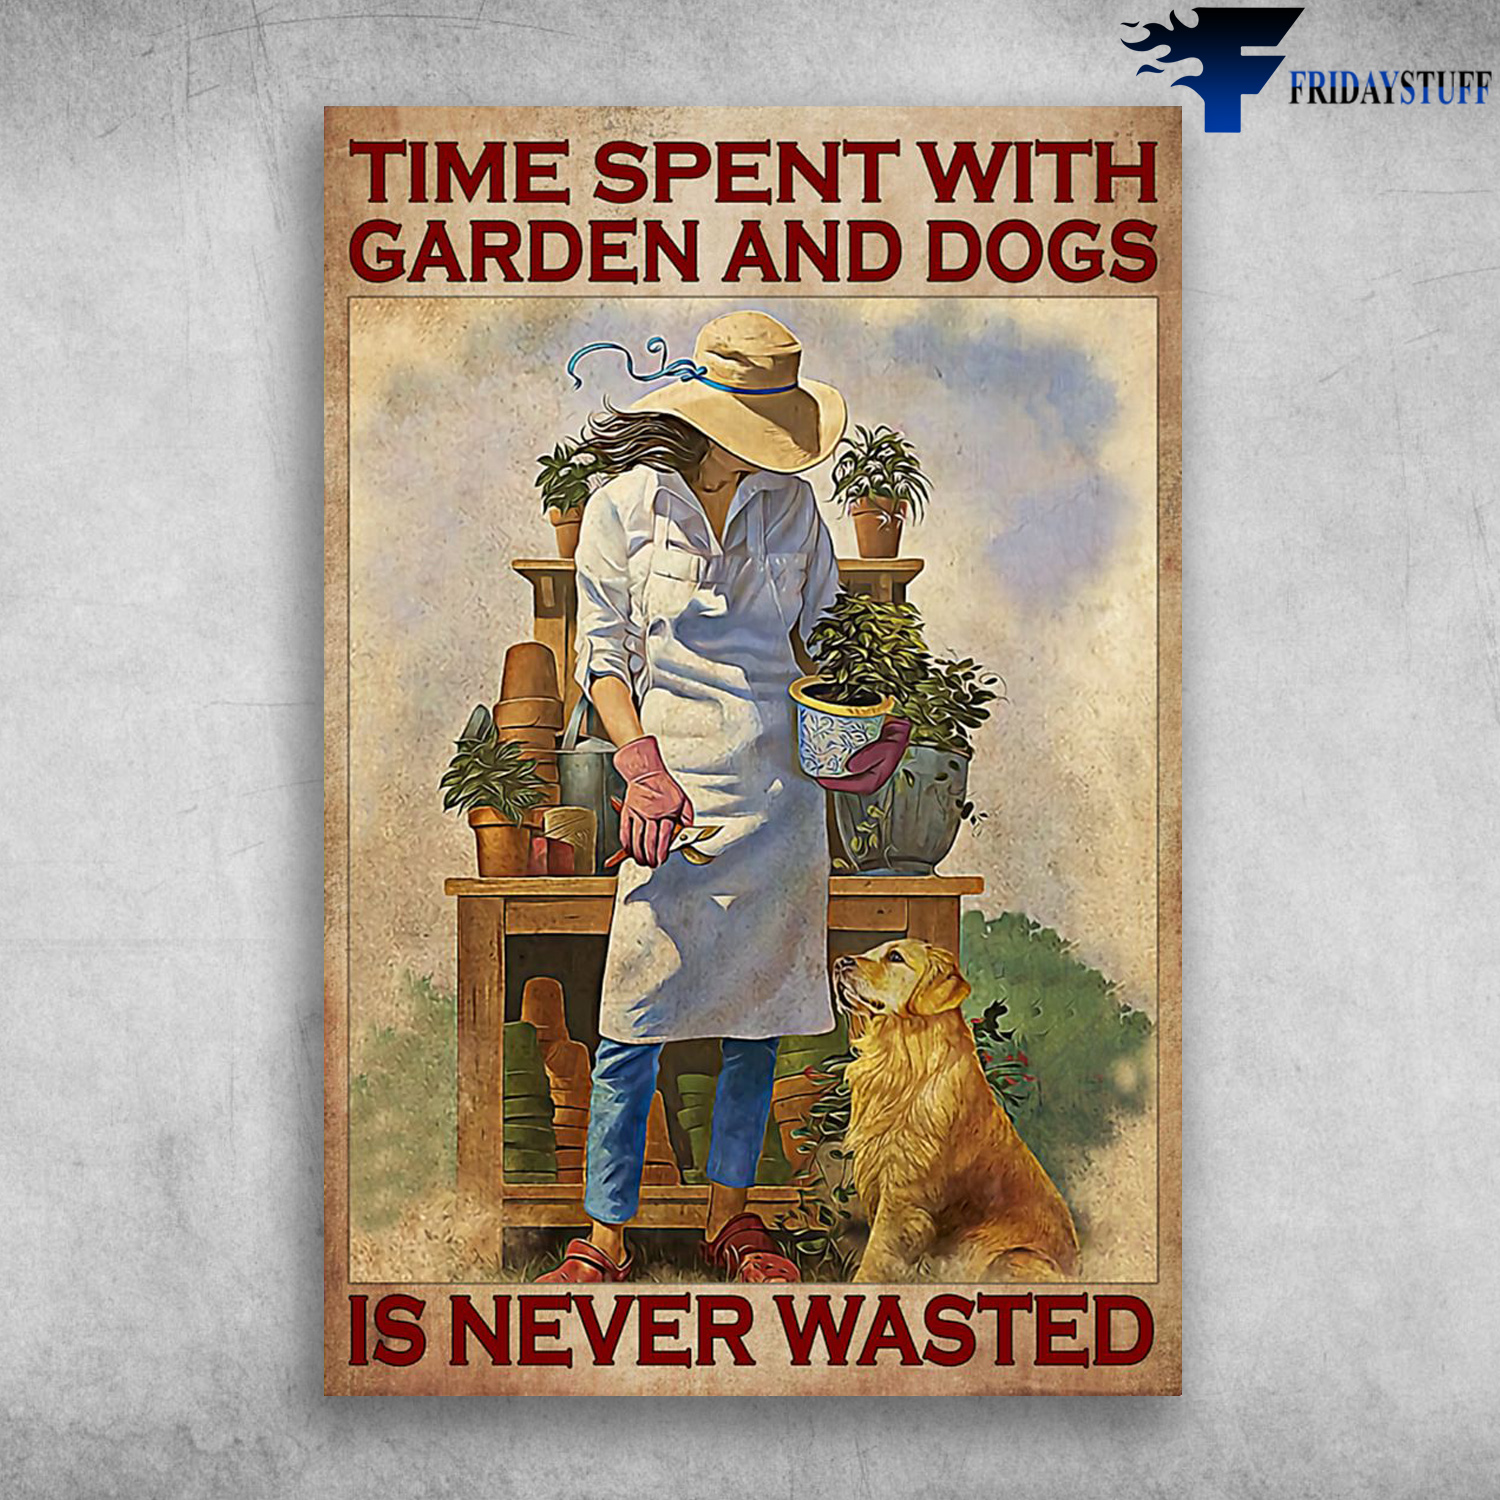 Girl Loves Garden And Dogs - Time Spent With Garden And Dogs Is Never Wasted